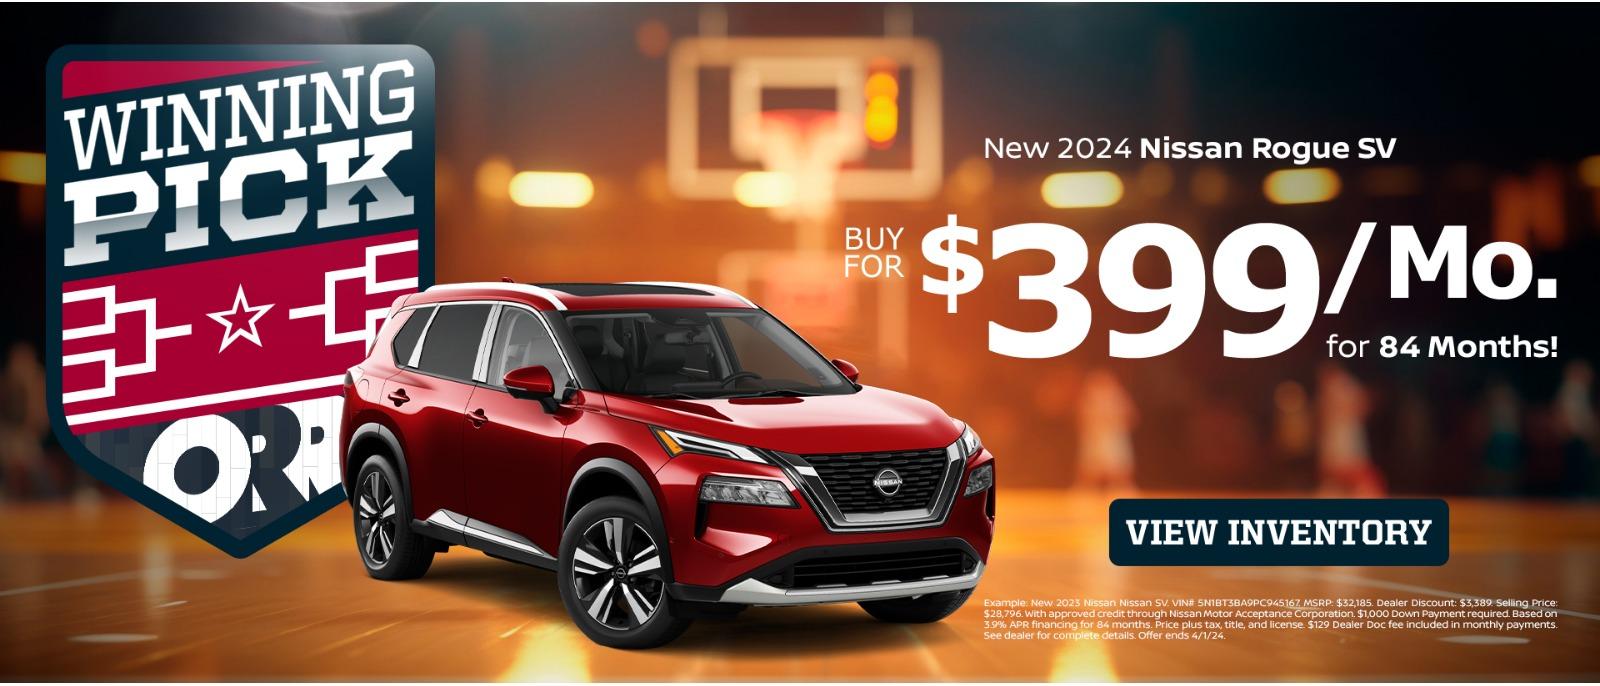 WINNING PICK *E OR C BUY FOR New 2024 Nissan Rogue SV $399/Mo. for 84 Months! VIEW INVENTORY Example : New 2023 Nissan Nissan SV VINE SNIBTSBAPPC945167 MSRP : $32,185 Dealer Discount $3,389 Selling Price : $28.796 with approved credit through Nissan Motor Acceptance Corporation $1,000 Down Payment hey payments 39% APR financing for 8 months, ivice ok tax rate and Scense $120 Dealer Doc fee increquired. Based on See dealer for complète details. Offer ends 4/1/24